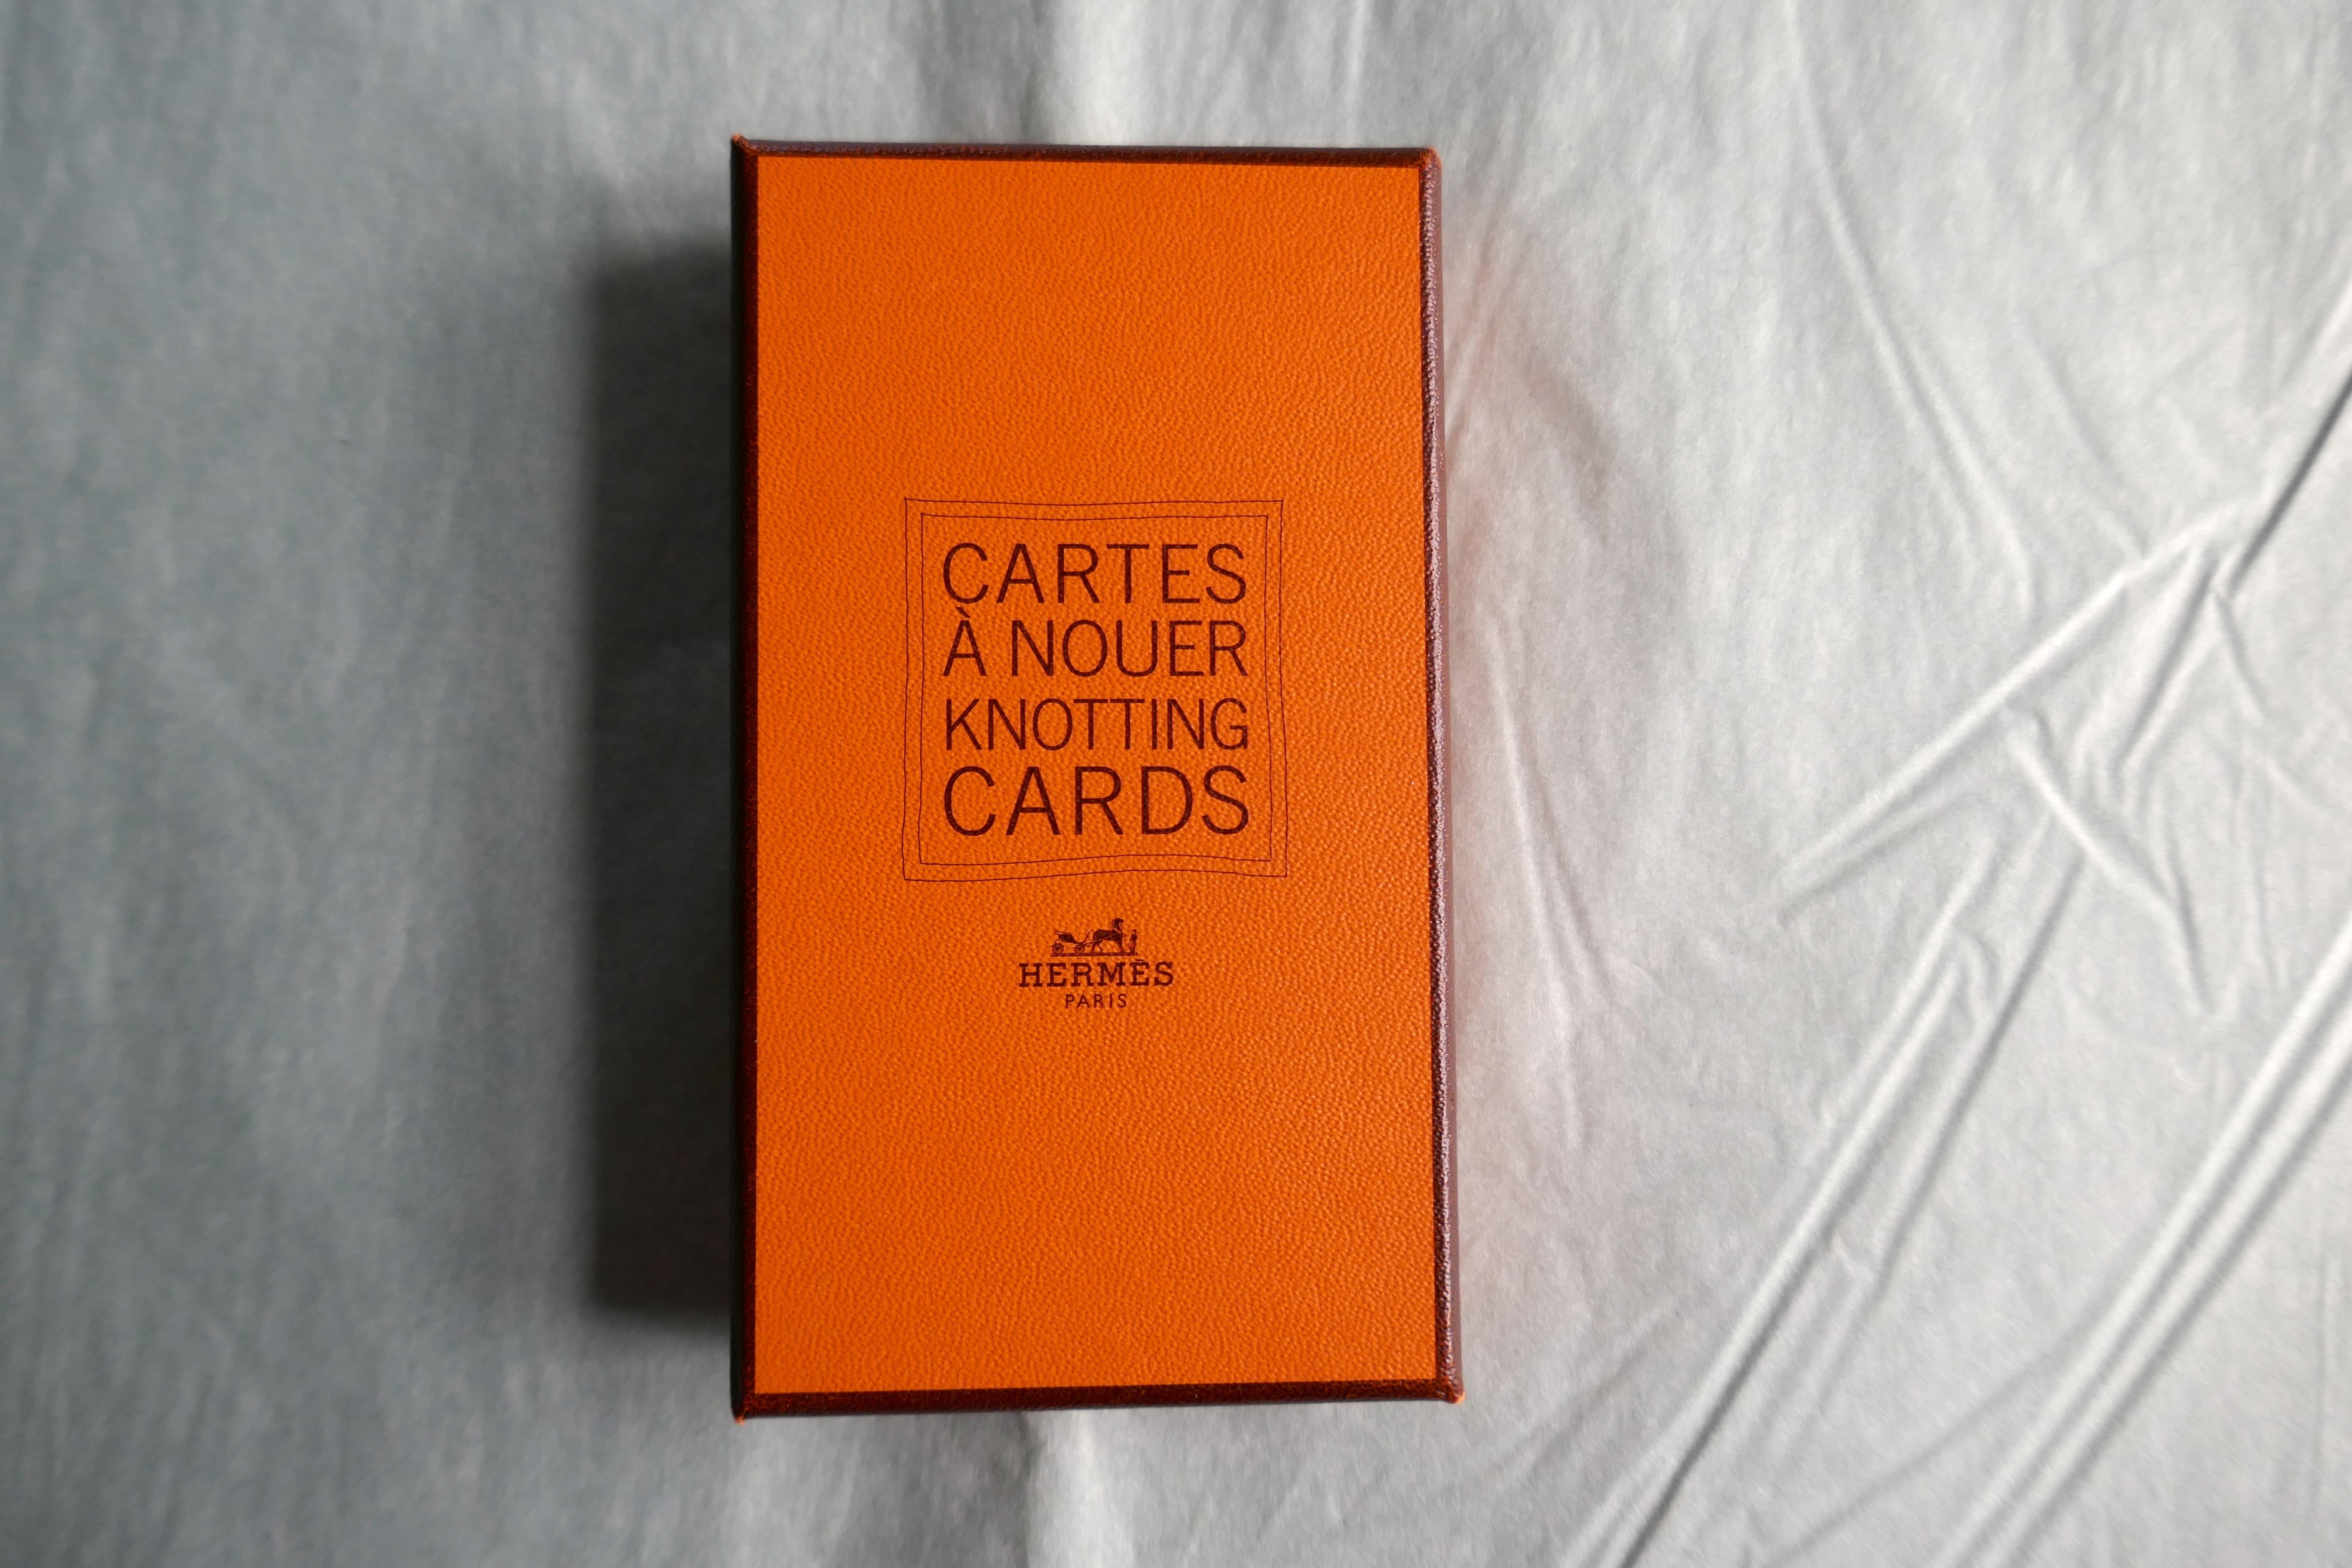 Hermès Knotting Cards in Original Orange Box!

Very interesting, it will show you how tie your scarves, in many funny possible ways!
A small gift for a fan of Hermès in new condition but has been opened. 

Authenticity Guaranteed
